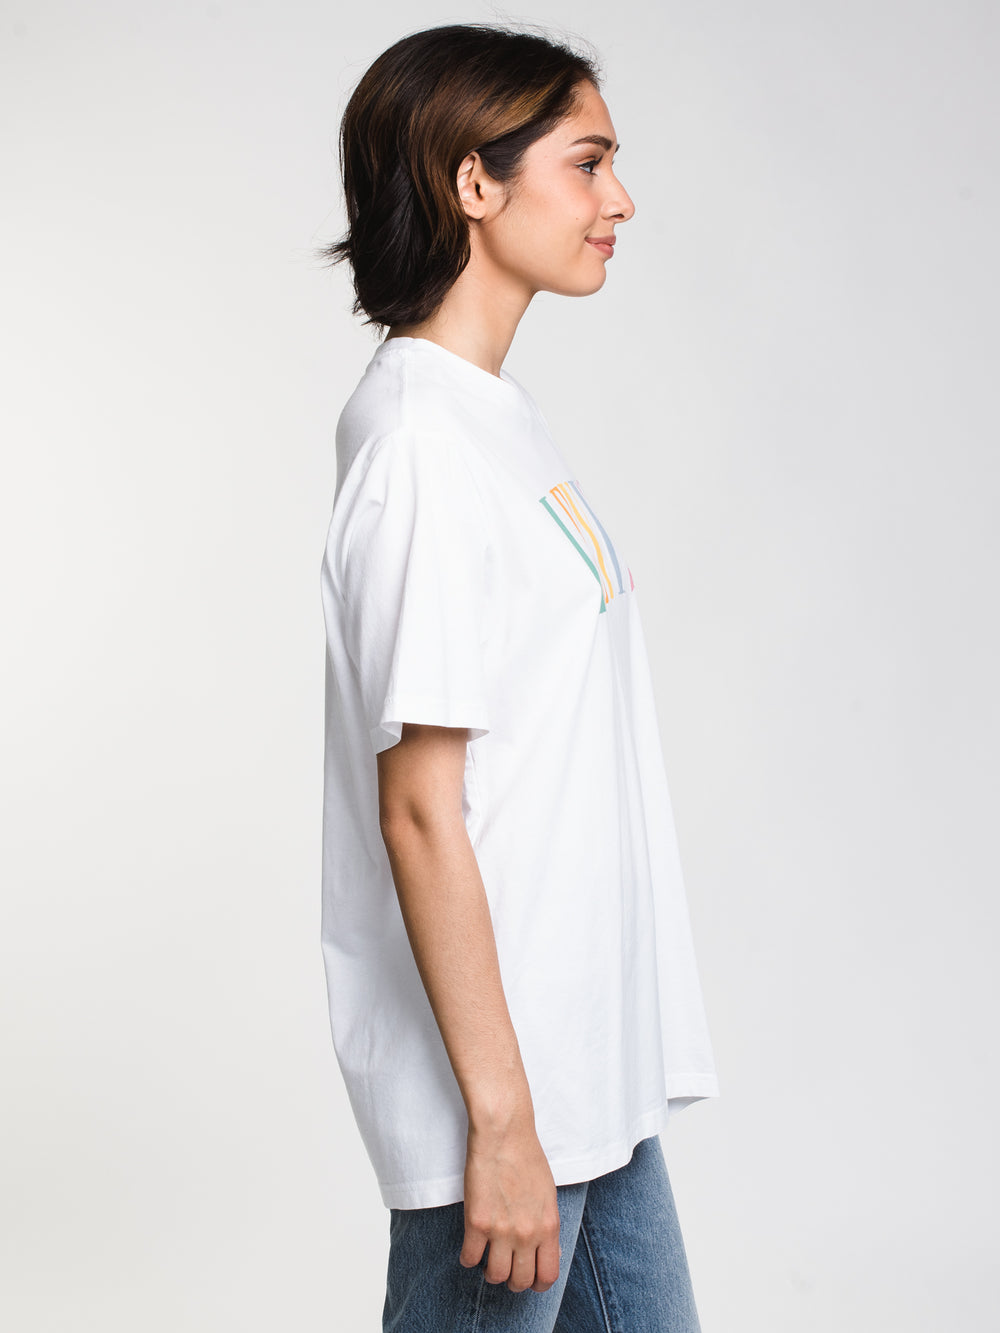 LEVIS RELAXED TEE 90'S LOGO  - CLEARANCE